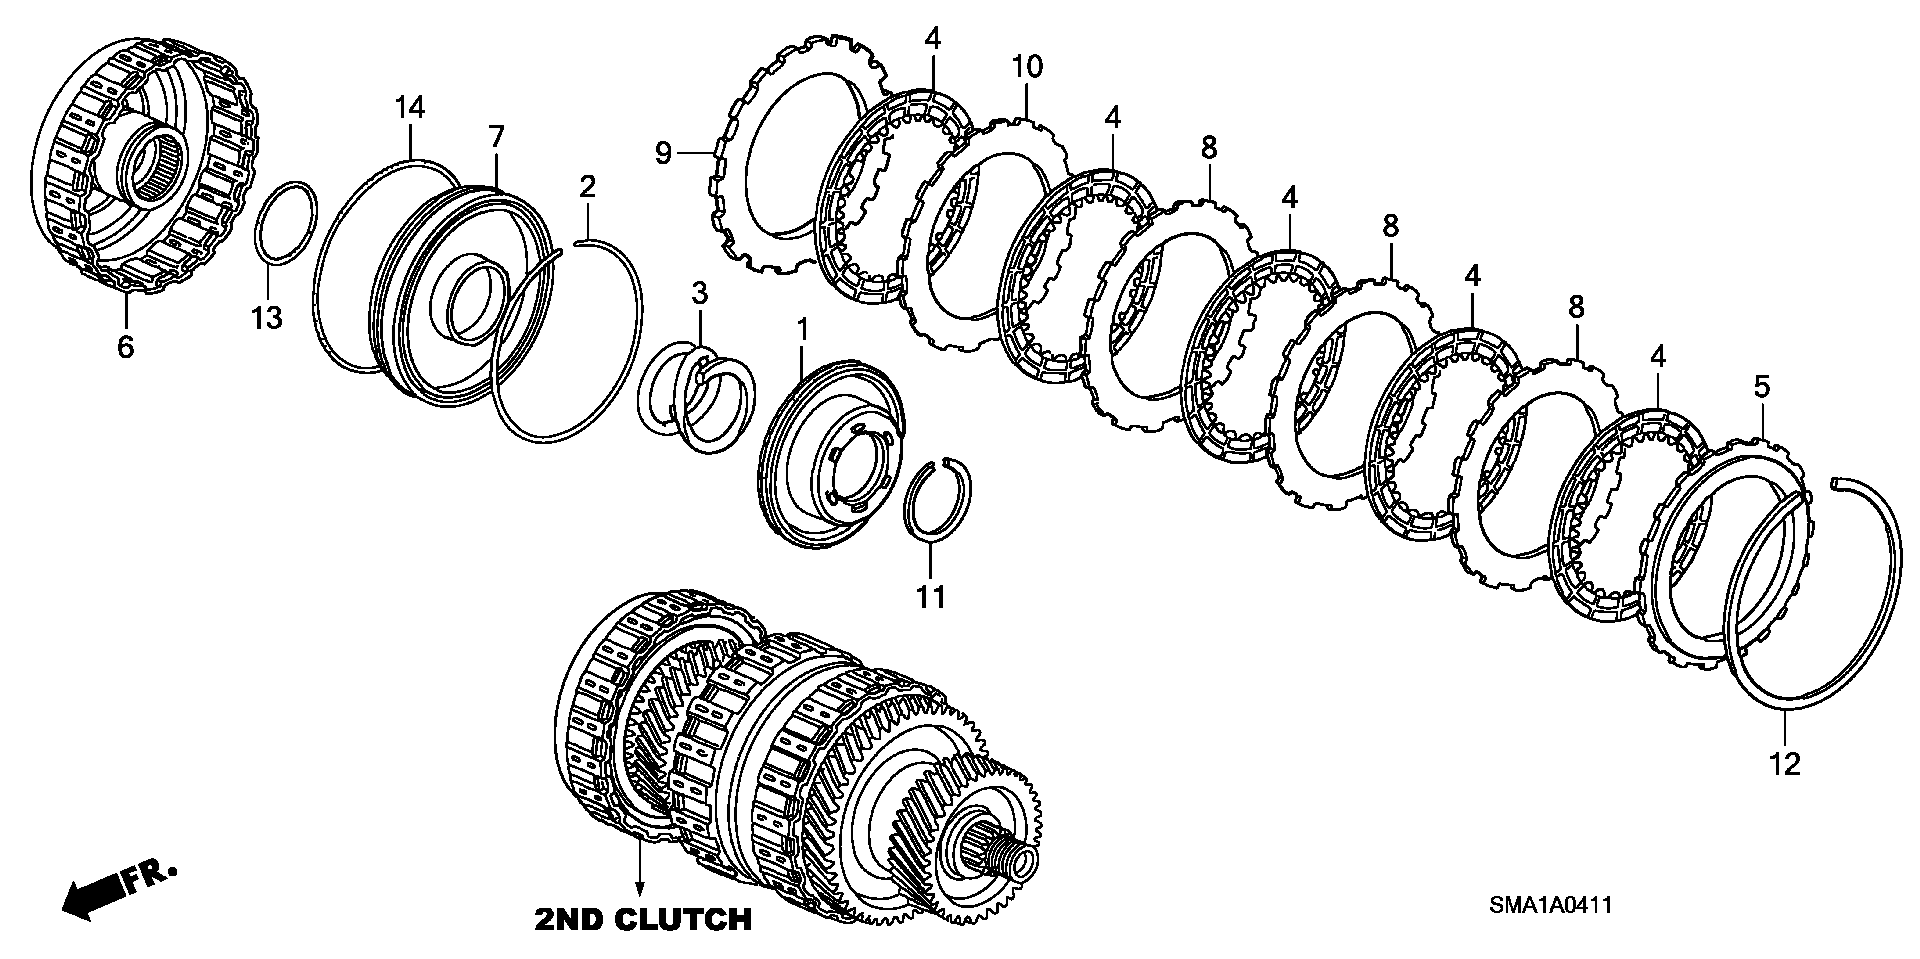 CLUTCH( SECOND) (4WD)